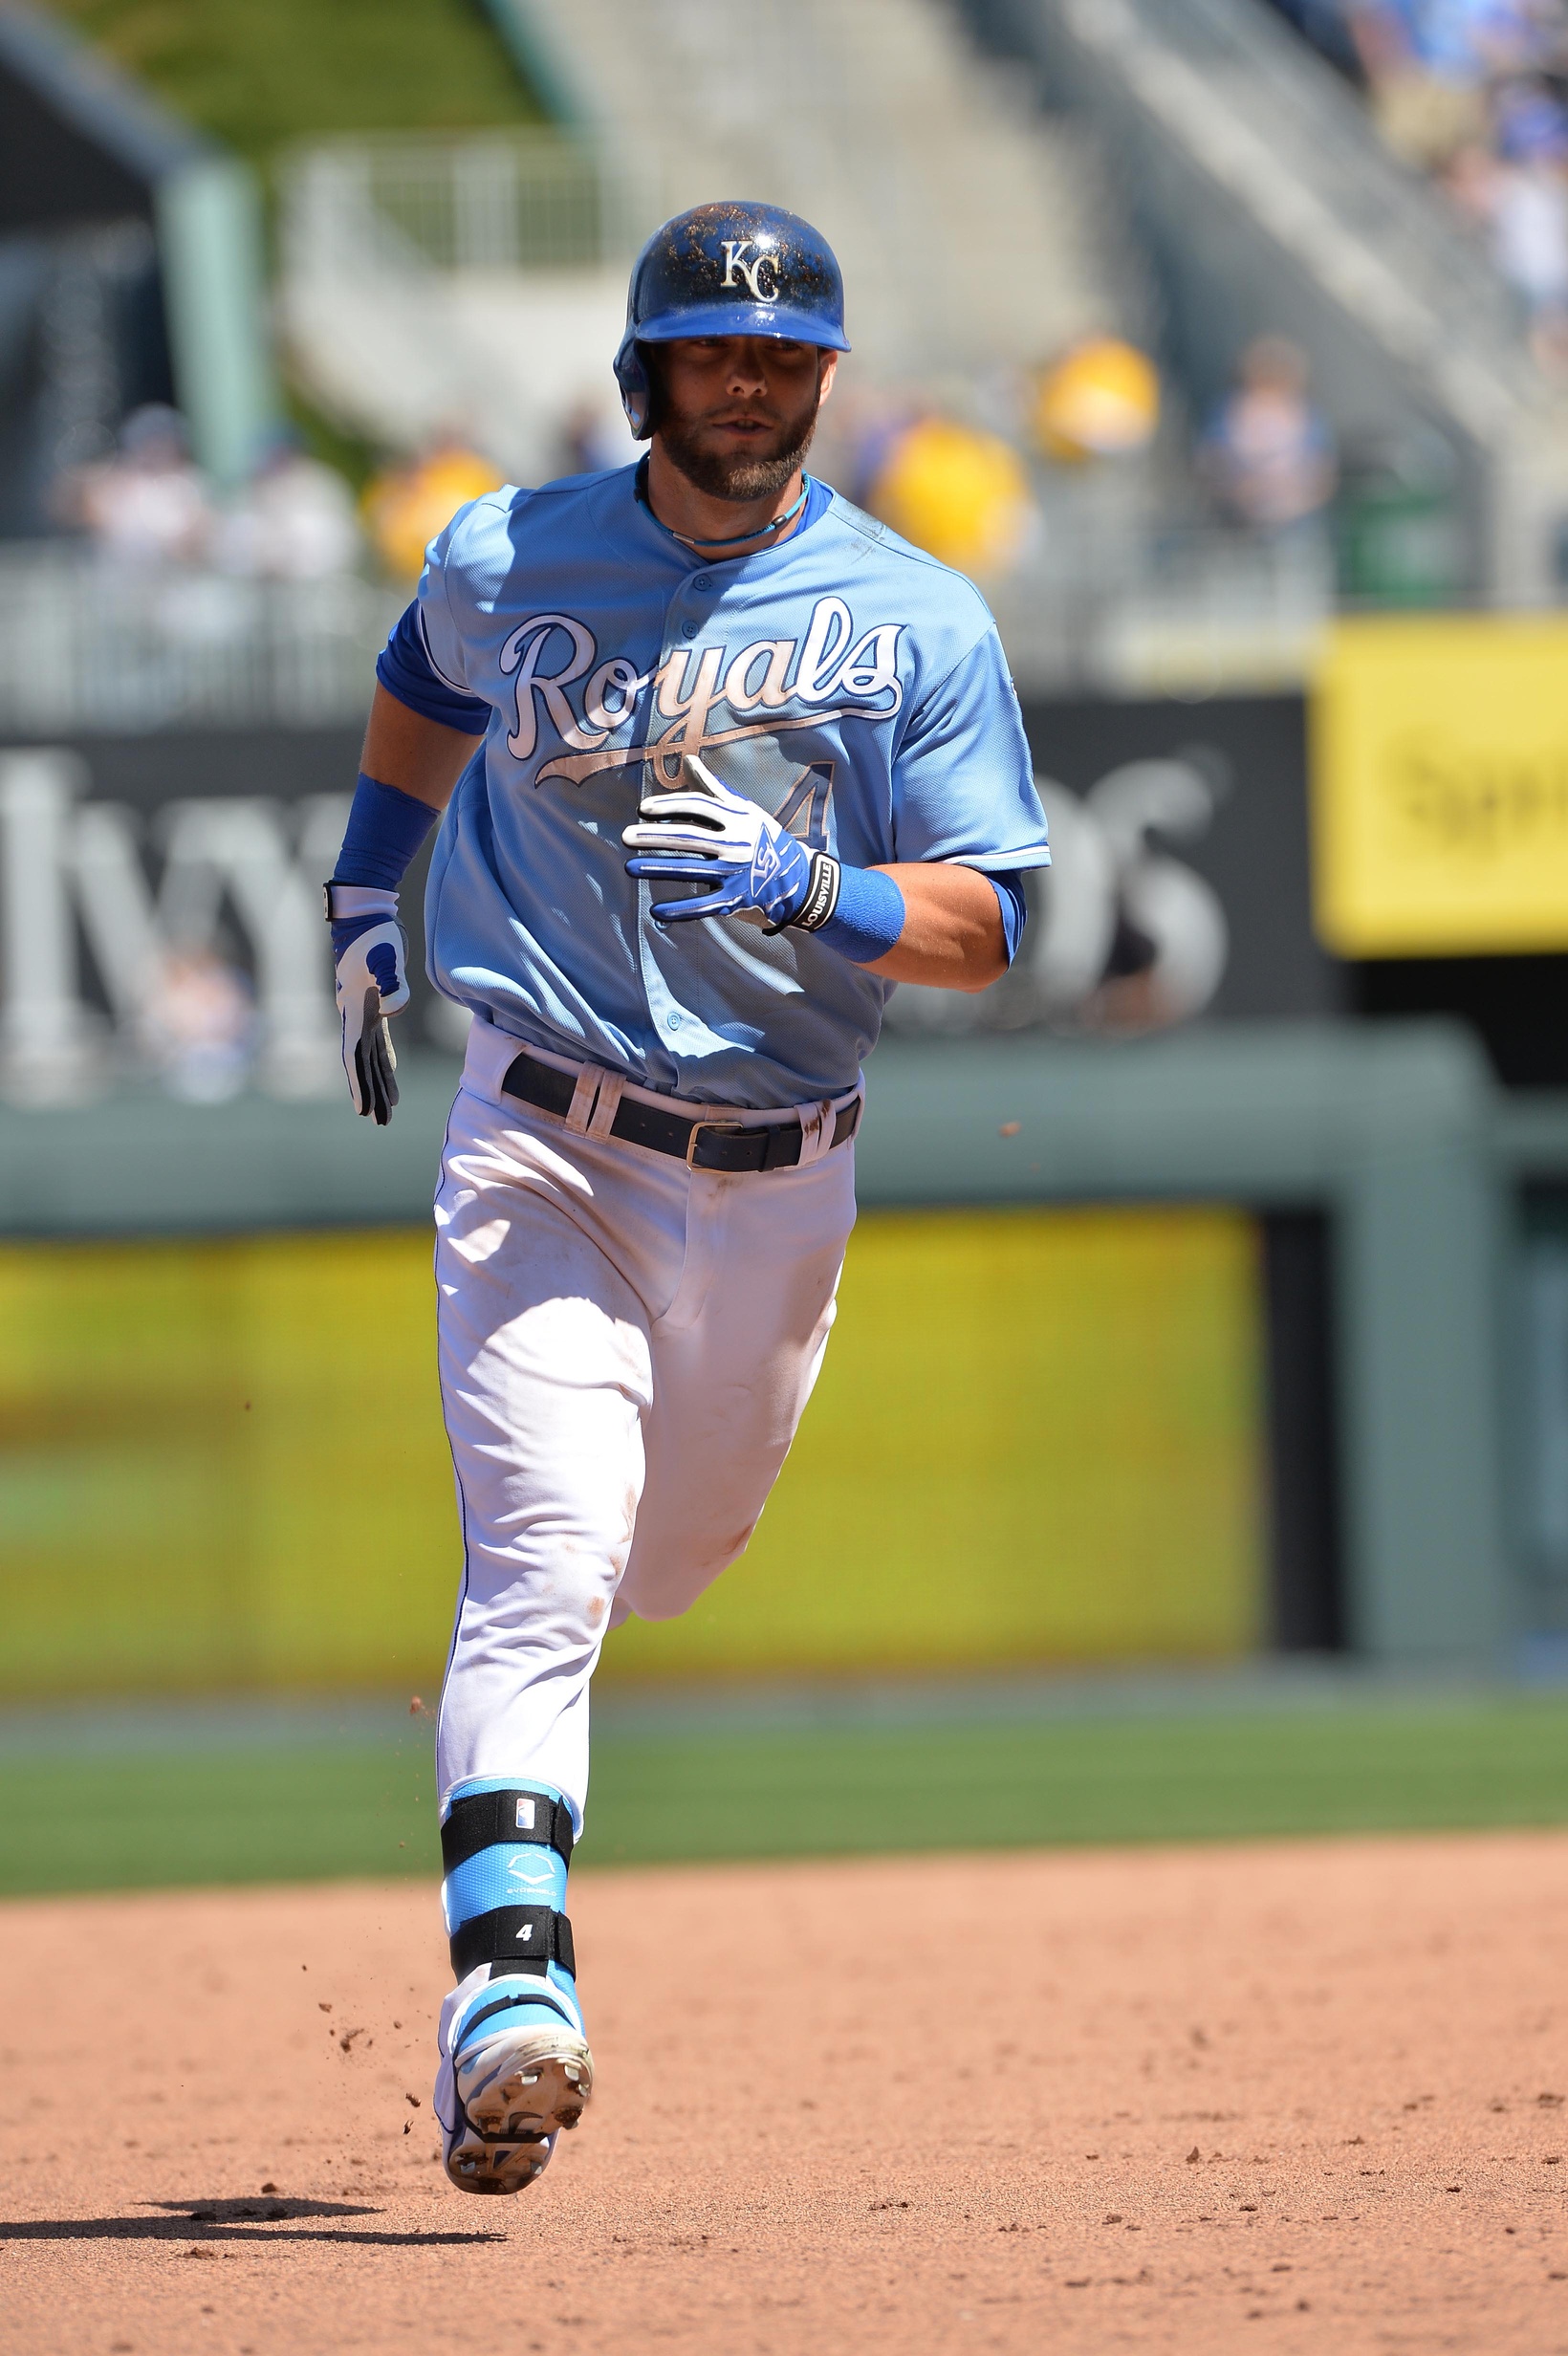 The Royals will need more home run trots from Alex Gordon to win the AL Central. Photo by Peter Aiken, USA Today Sports Images